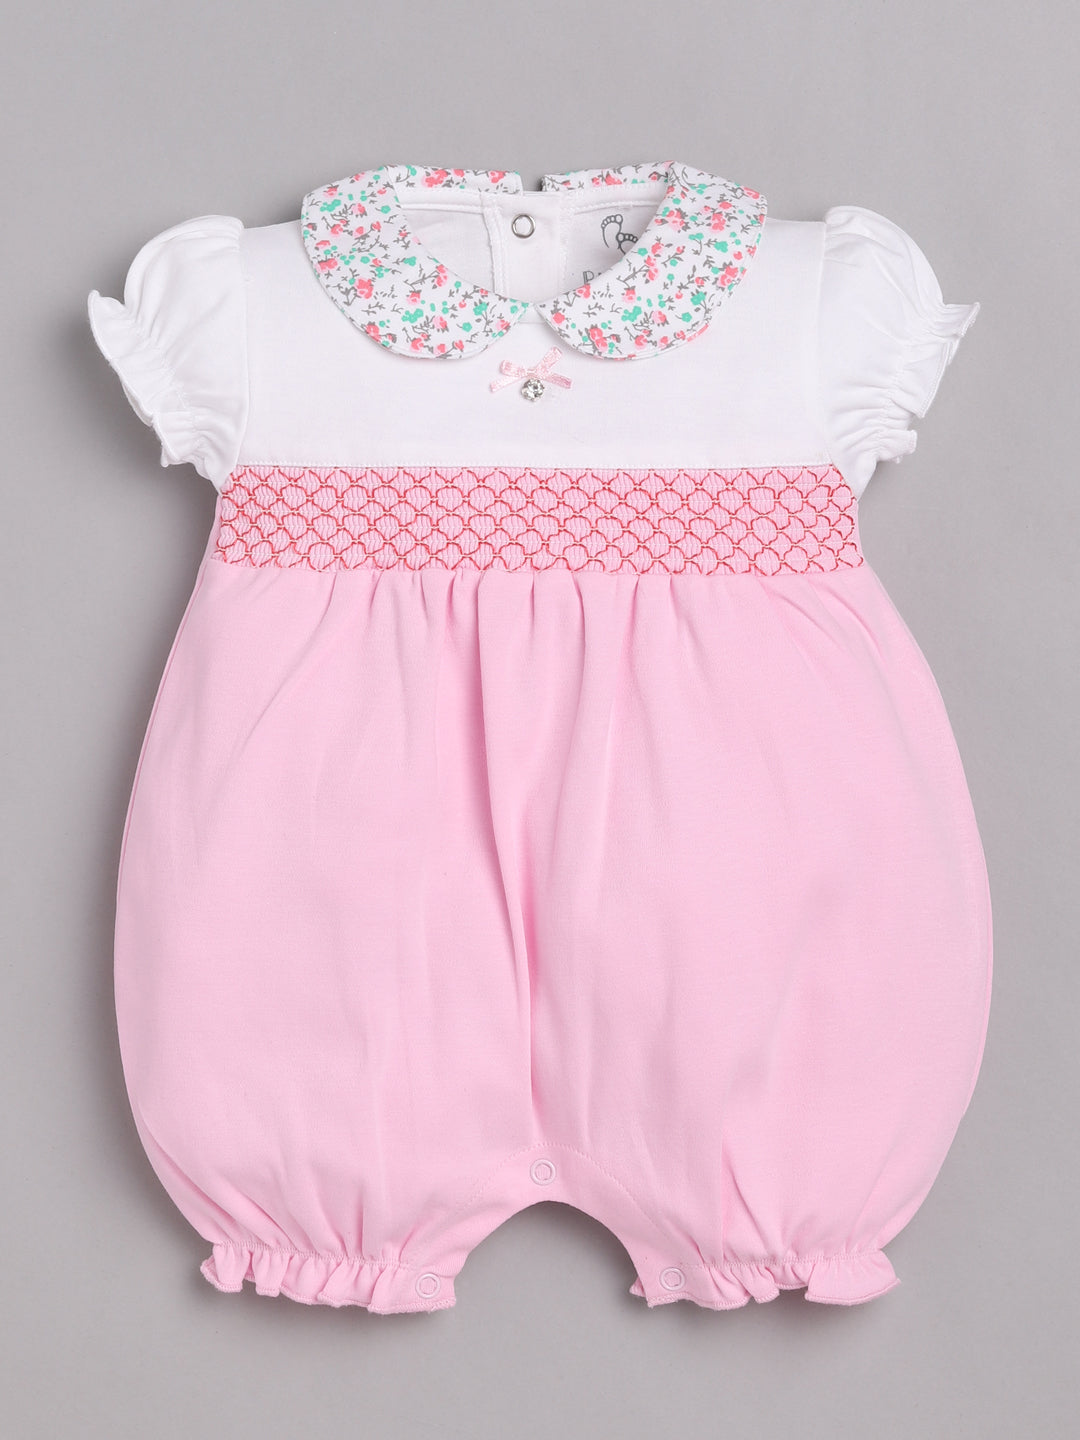 Half Sleeves Round neck Romper/Summer clothes/Creeper/new born/infent wear/ for Baby Girls 100% Pure Cotton-PINK